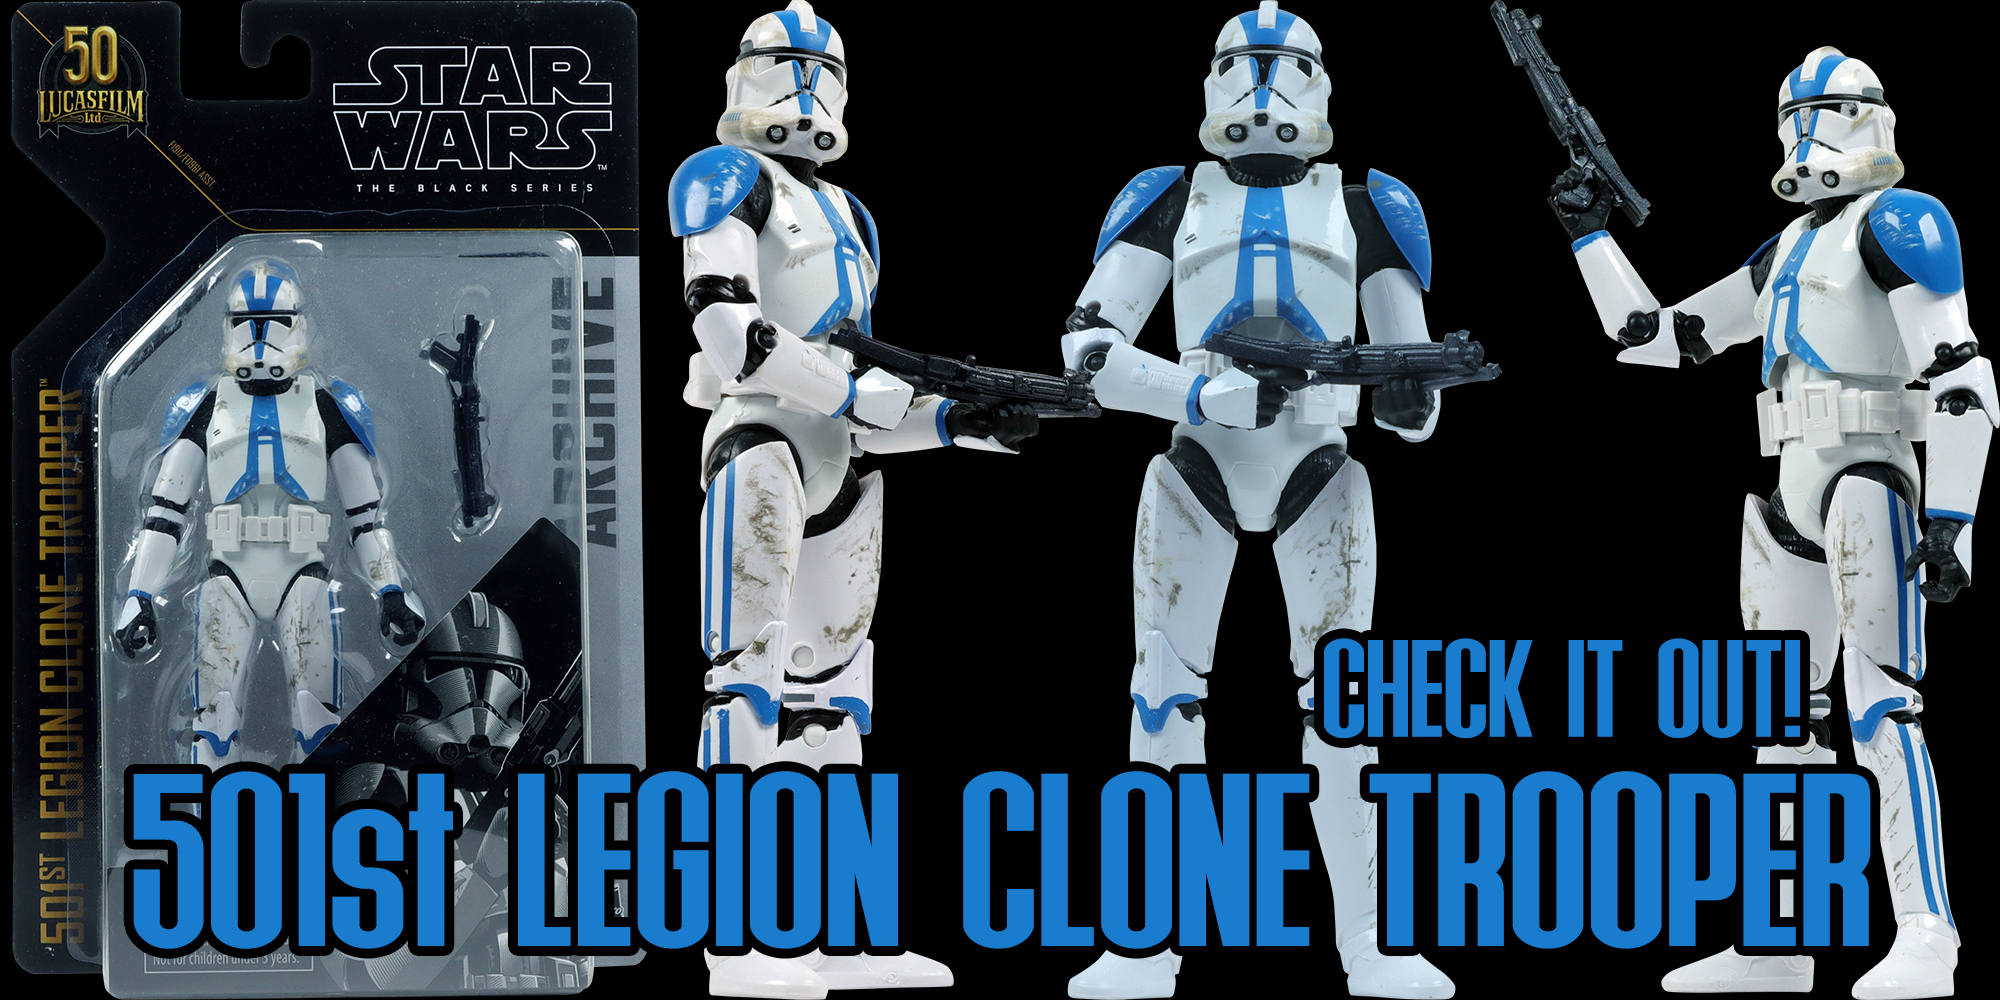 Black Series 501st Legion Clone Trooper Archived - Check It Out!